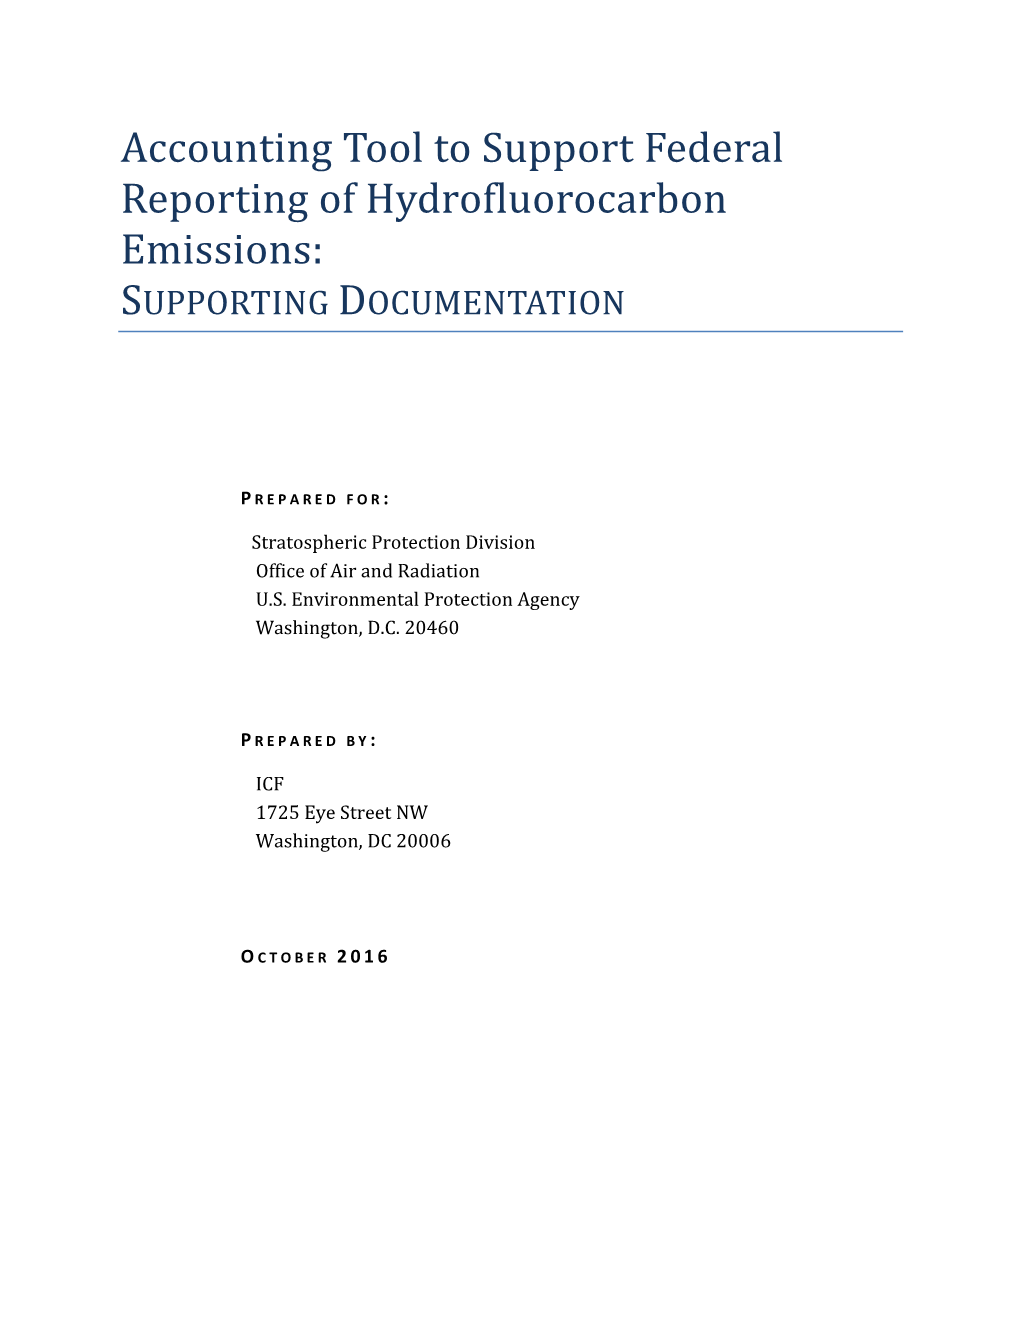 Accounting Tool to Support Federal Reporting of Hydrofluorocarbon Emissions: SUPPORTING DOCUMENTATION